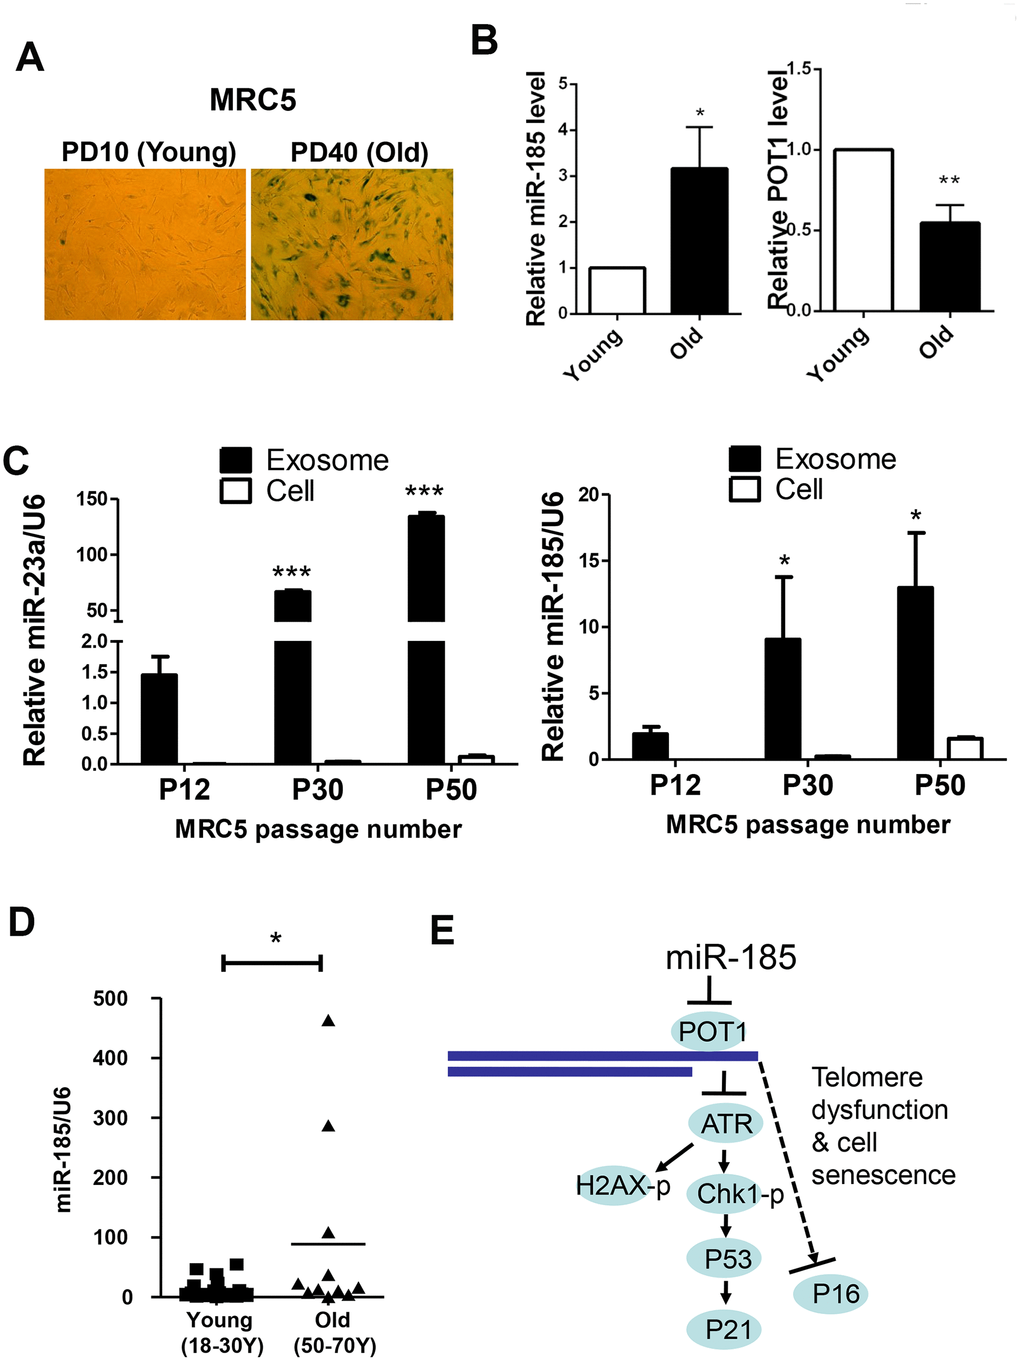 MiR-185 represents a novel replicative senescence biomarker in vitro and in vivo. (A) Young wild-type MRC5 cells were passaged to the old (From PD10 to PD40) and were stained for β-galactosidase activity respectively. (B) The relative expression levels of miR-185 and POT1 in cells from (A) were detected and normalized using U6 and GAPDH levels respectively. (C) MRC5 cells from different passages were cultured, and exosomes were obtained by ultracentrifugation. The relative expression levels of miR-23a and miR-185 were detected and normalized using U6. (D) The relative expression levels of miR-185 from young (males aged 18-30) and old (males aged 50-70) people were detected and normalized using U6 (n=19 and 11 respectively). P values were determined by Student’s t-test. *PE) Proposed model by which miR-185 induces telomere dysfunction and cell senescence via the POT1 pathway.